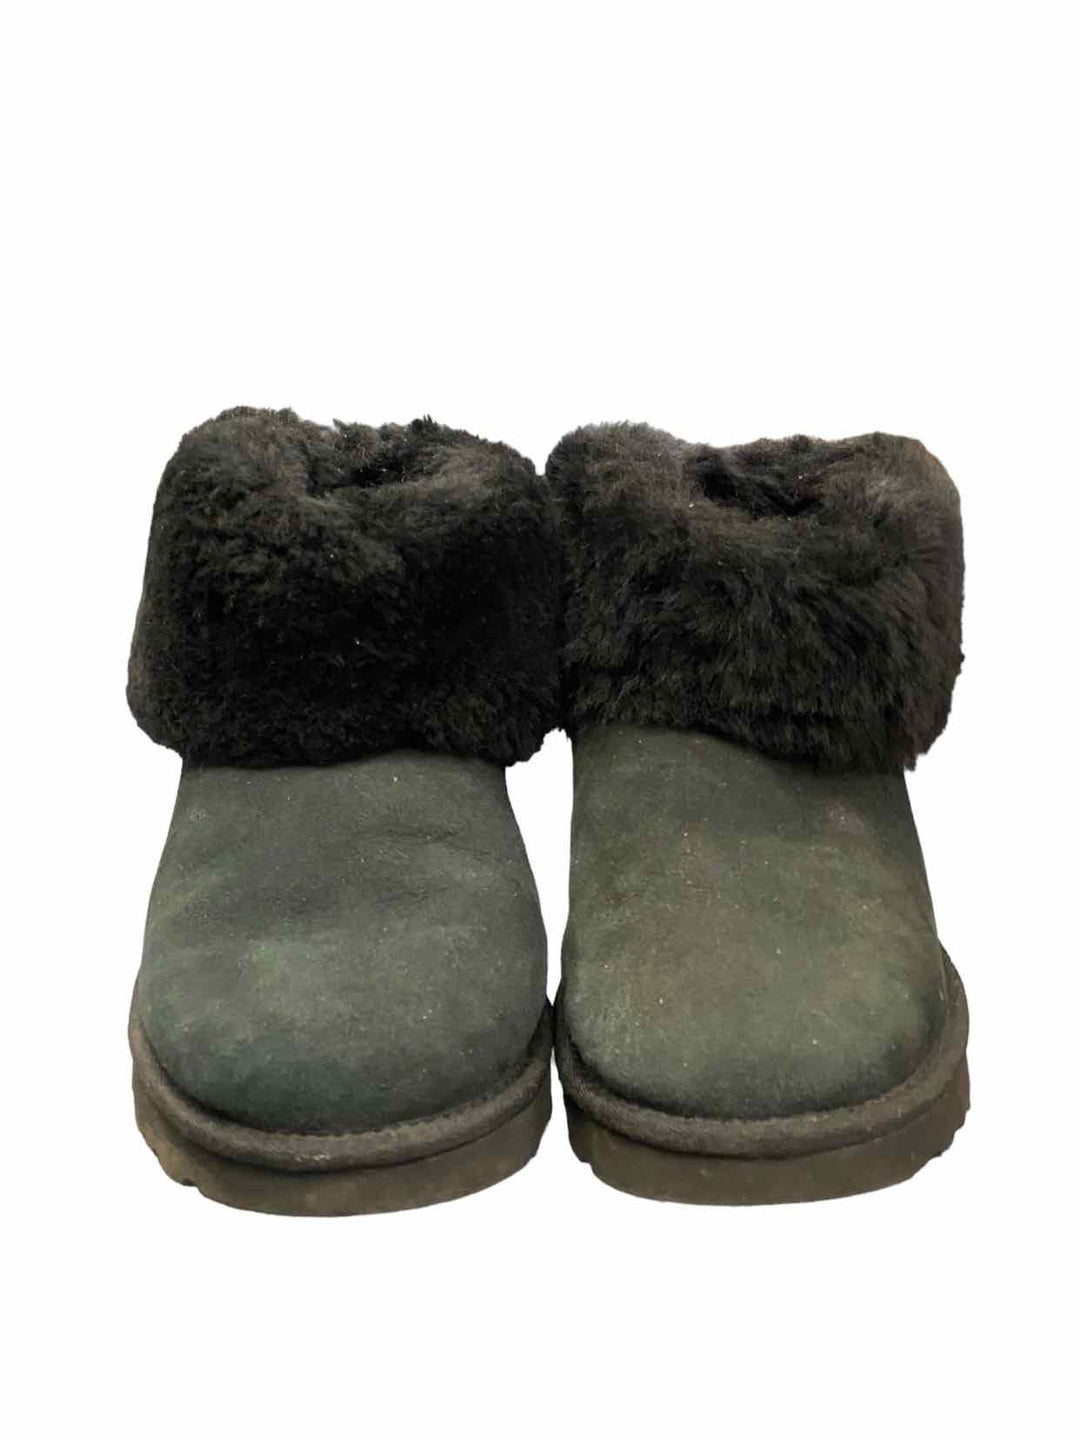 UGG Shoe Size 7 Black Boots(Ankle)